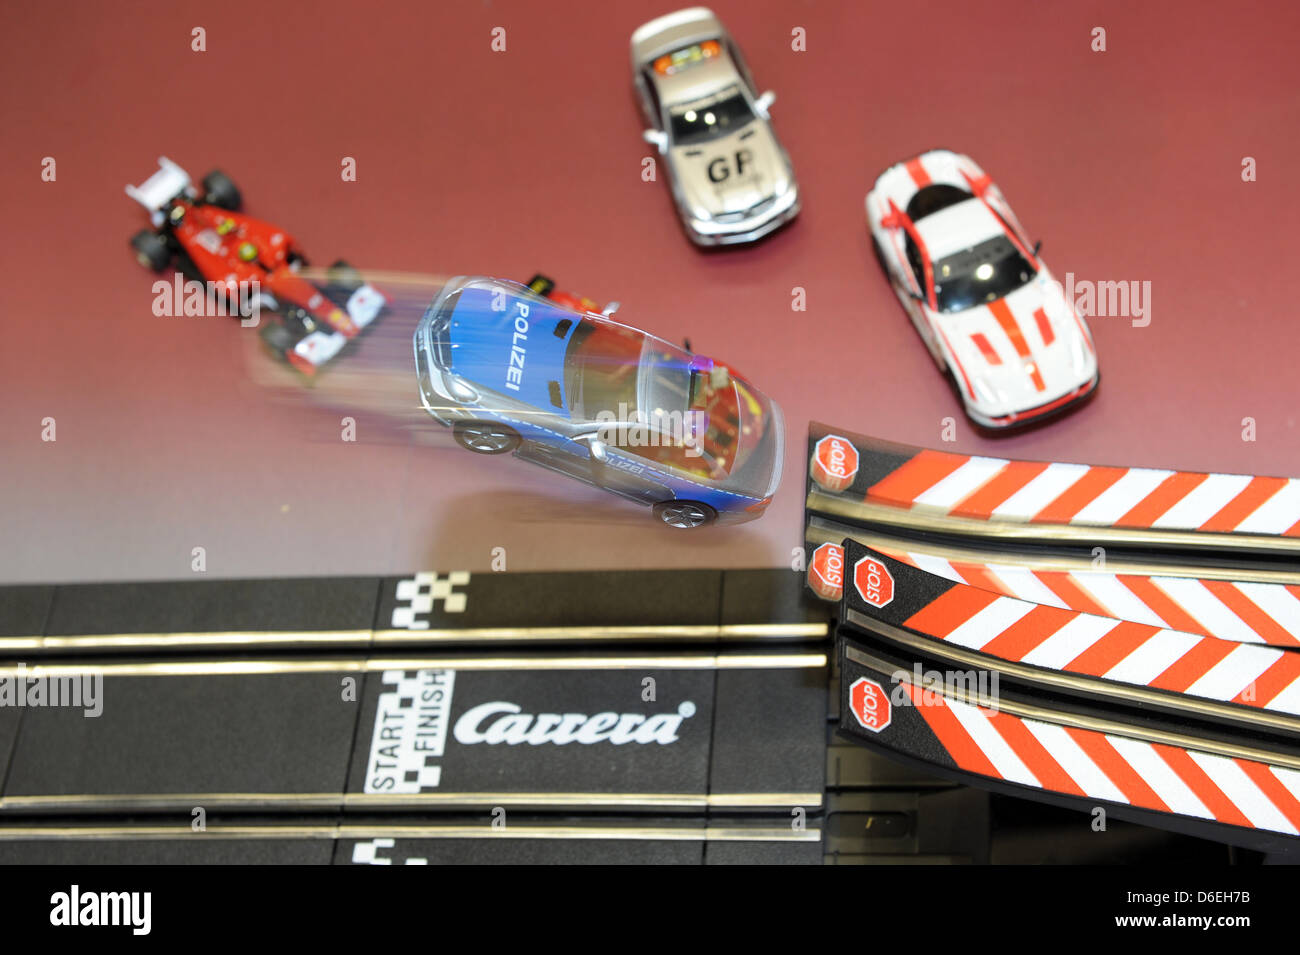 A police car jumps a ramp on a Carrera track at the 63rd International Toy  Fair in Nuremberg, Germany, 01 February 2012. At the world's largest toy  trade fair, 2,800 exhibitors from